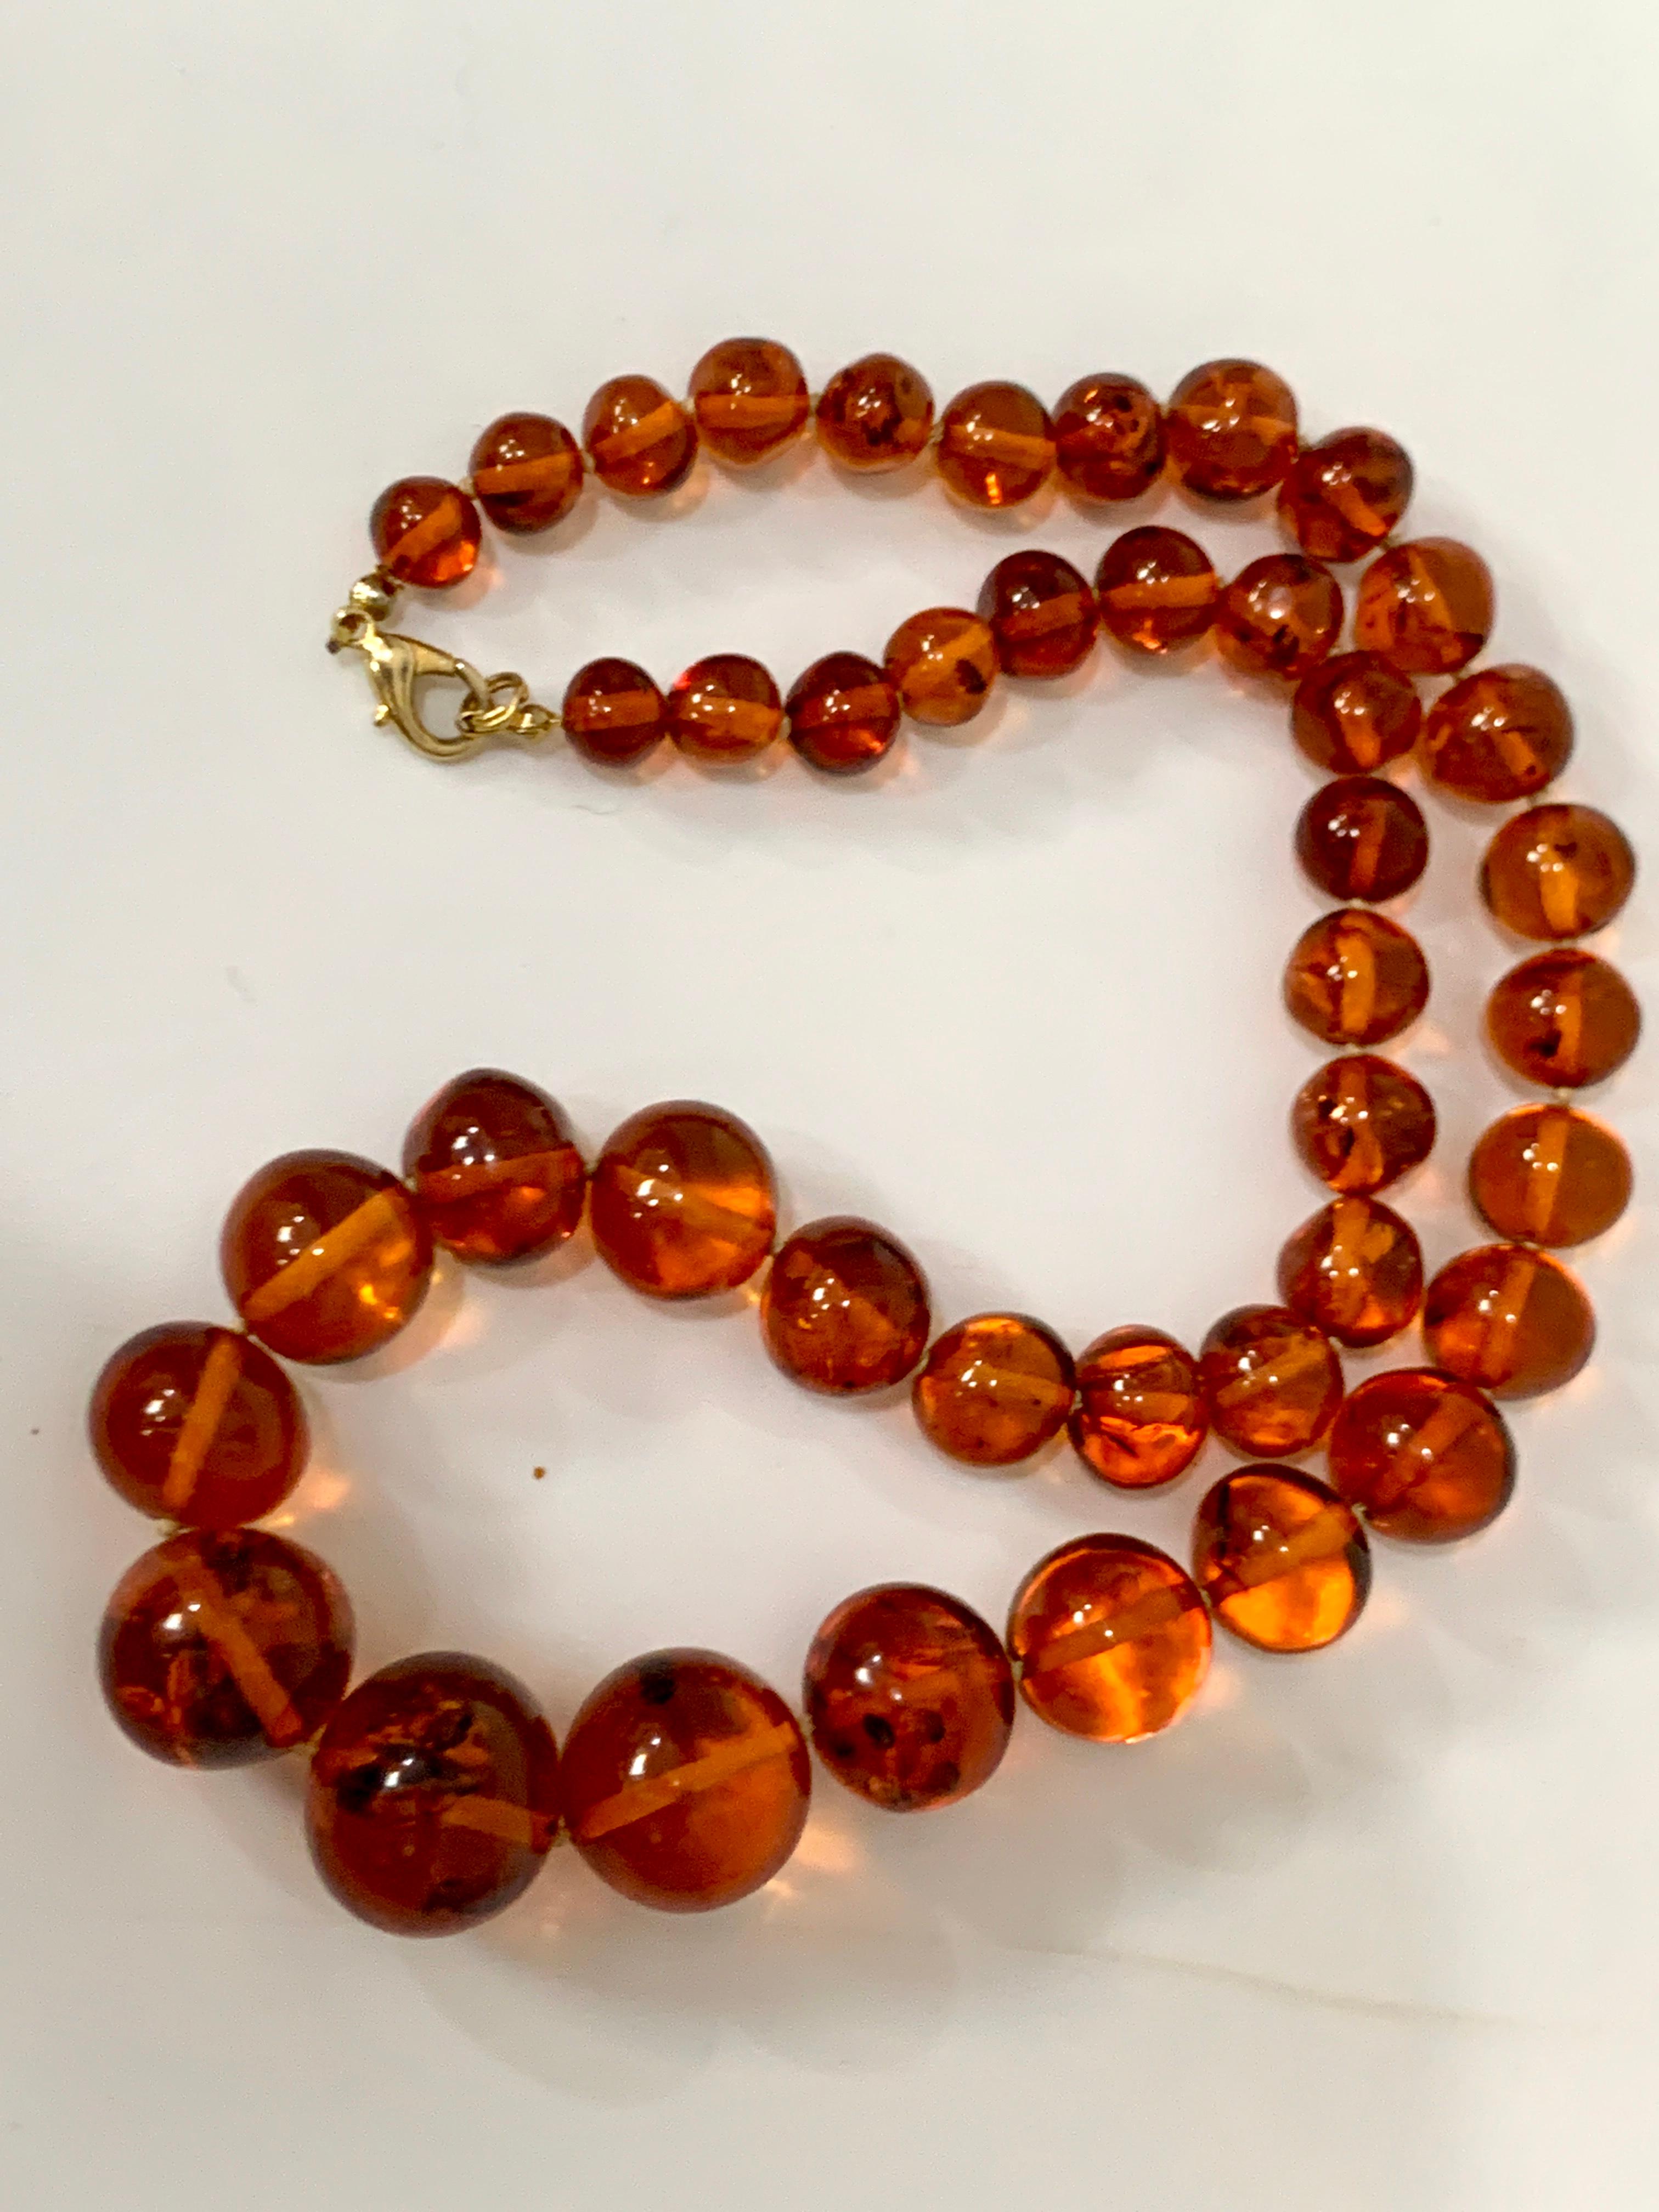 250 Ct Natural Amber Single Strand Graduating Bead Necklace with 18K Gold Clasp 3